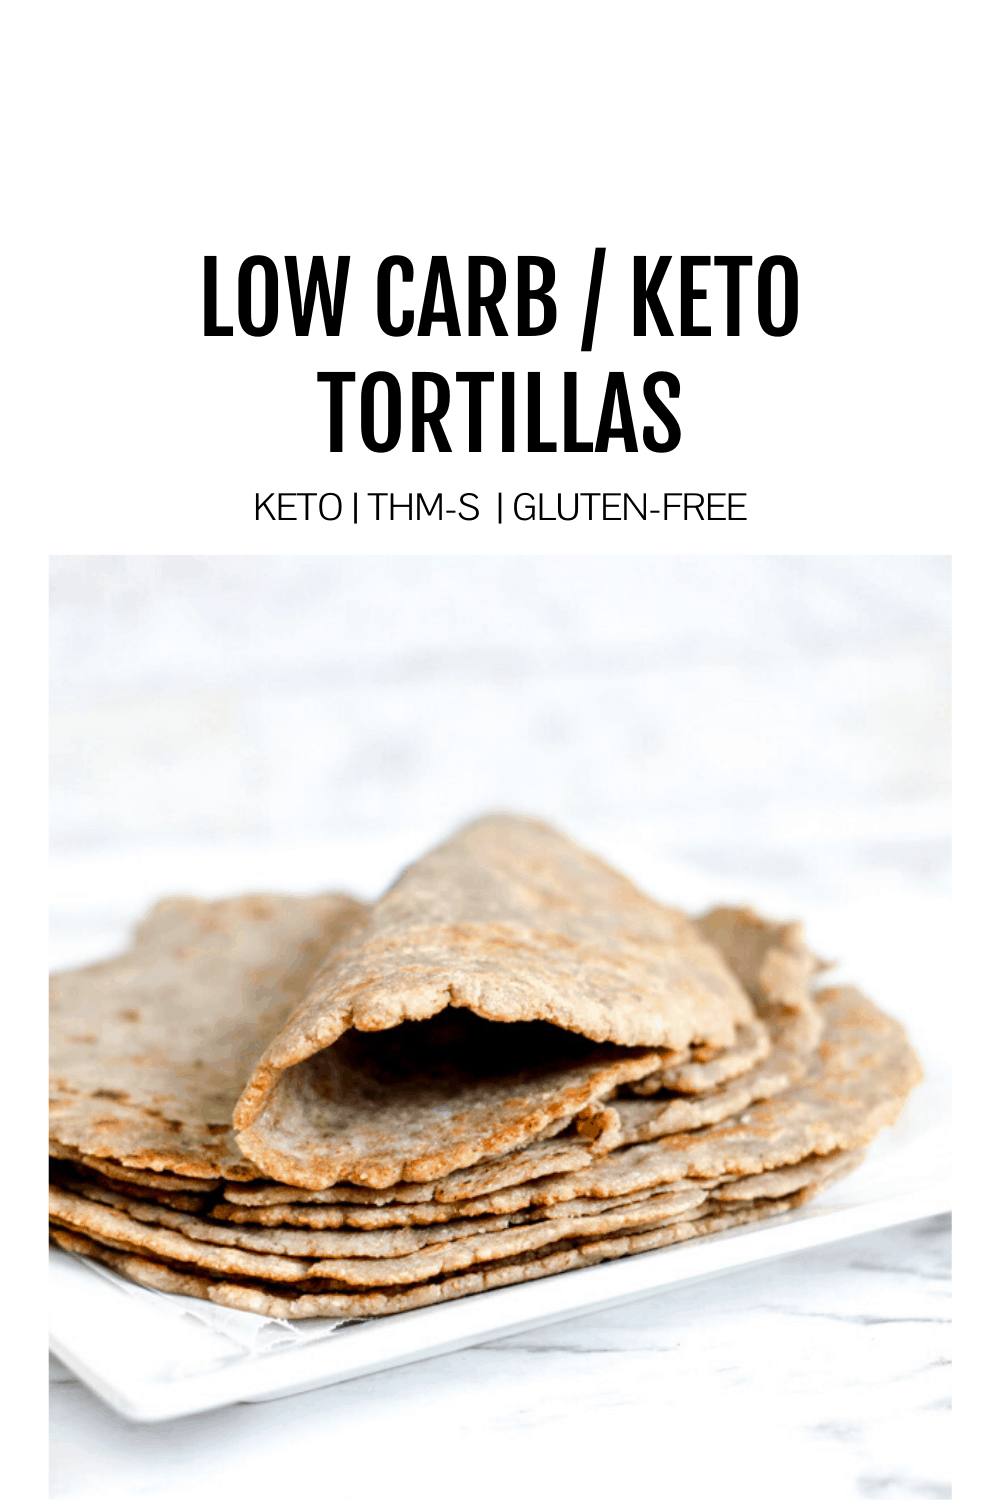 image of low-carb tortillas with the title low carb/keto tortillas